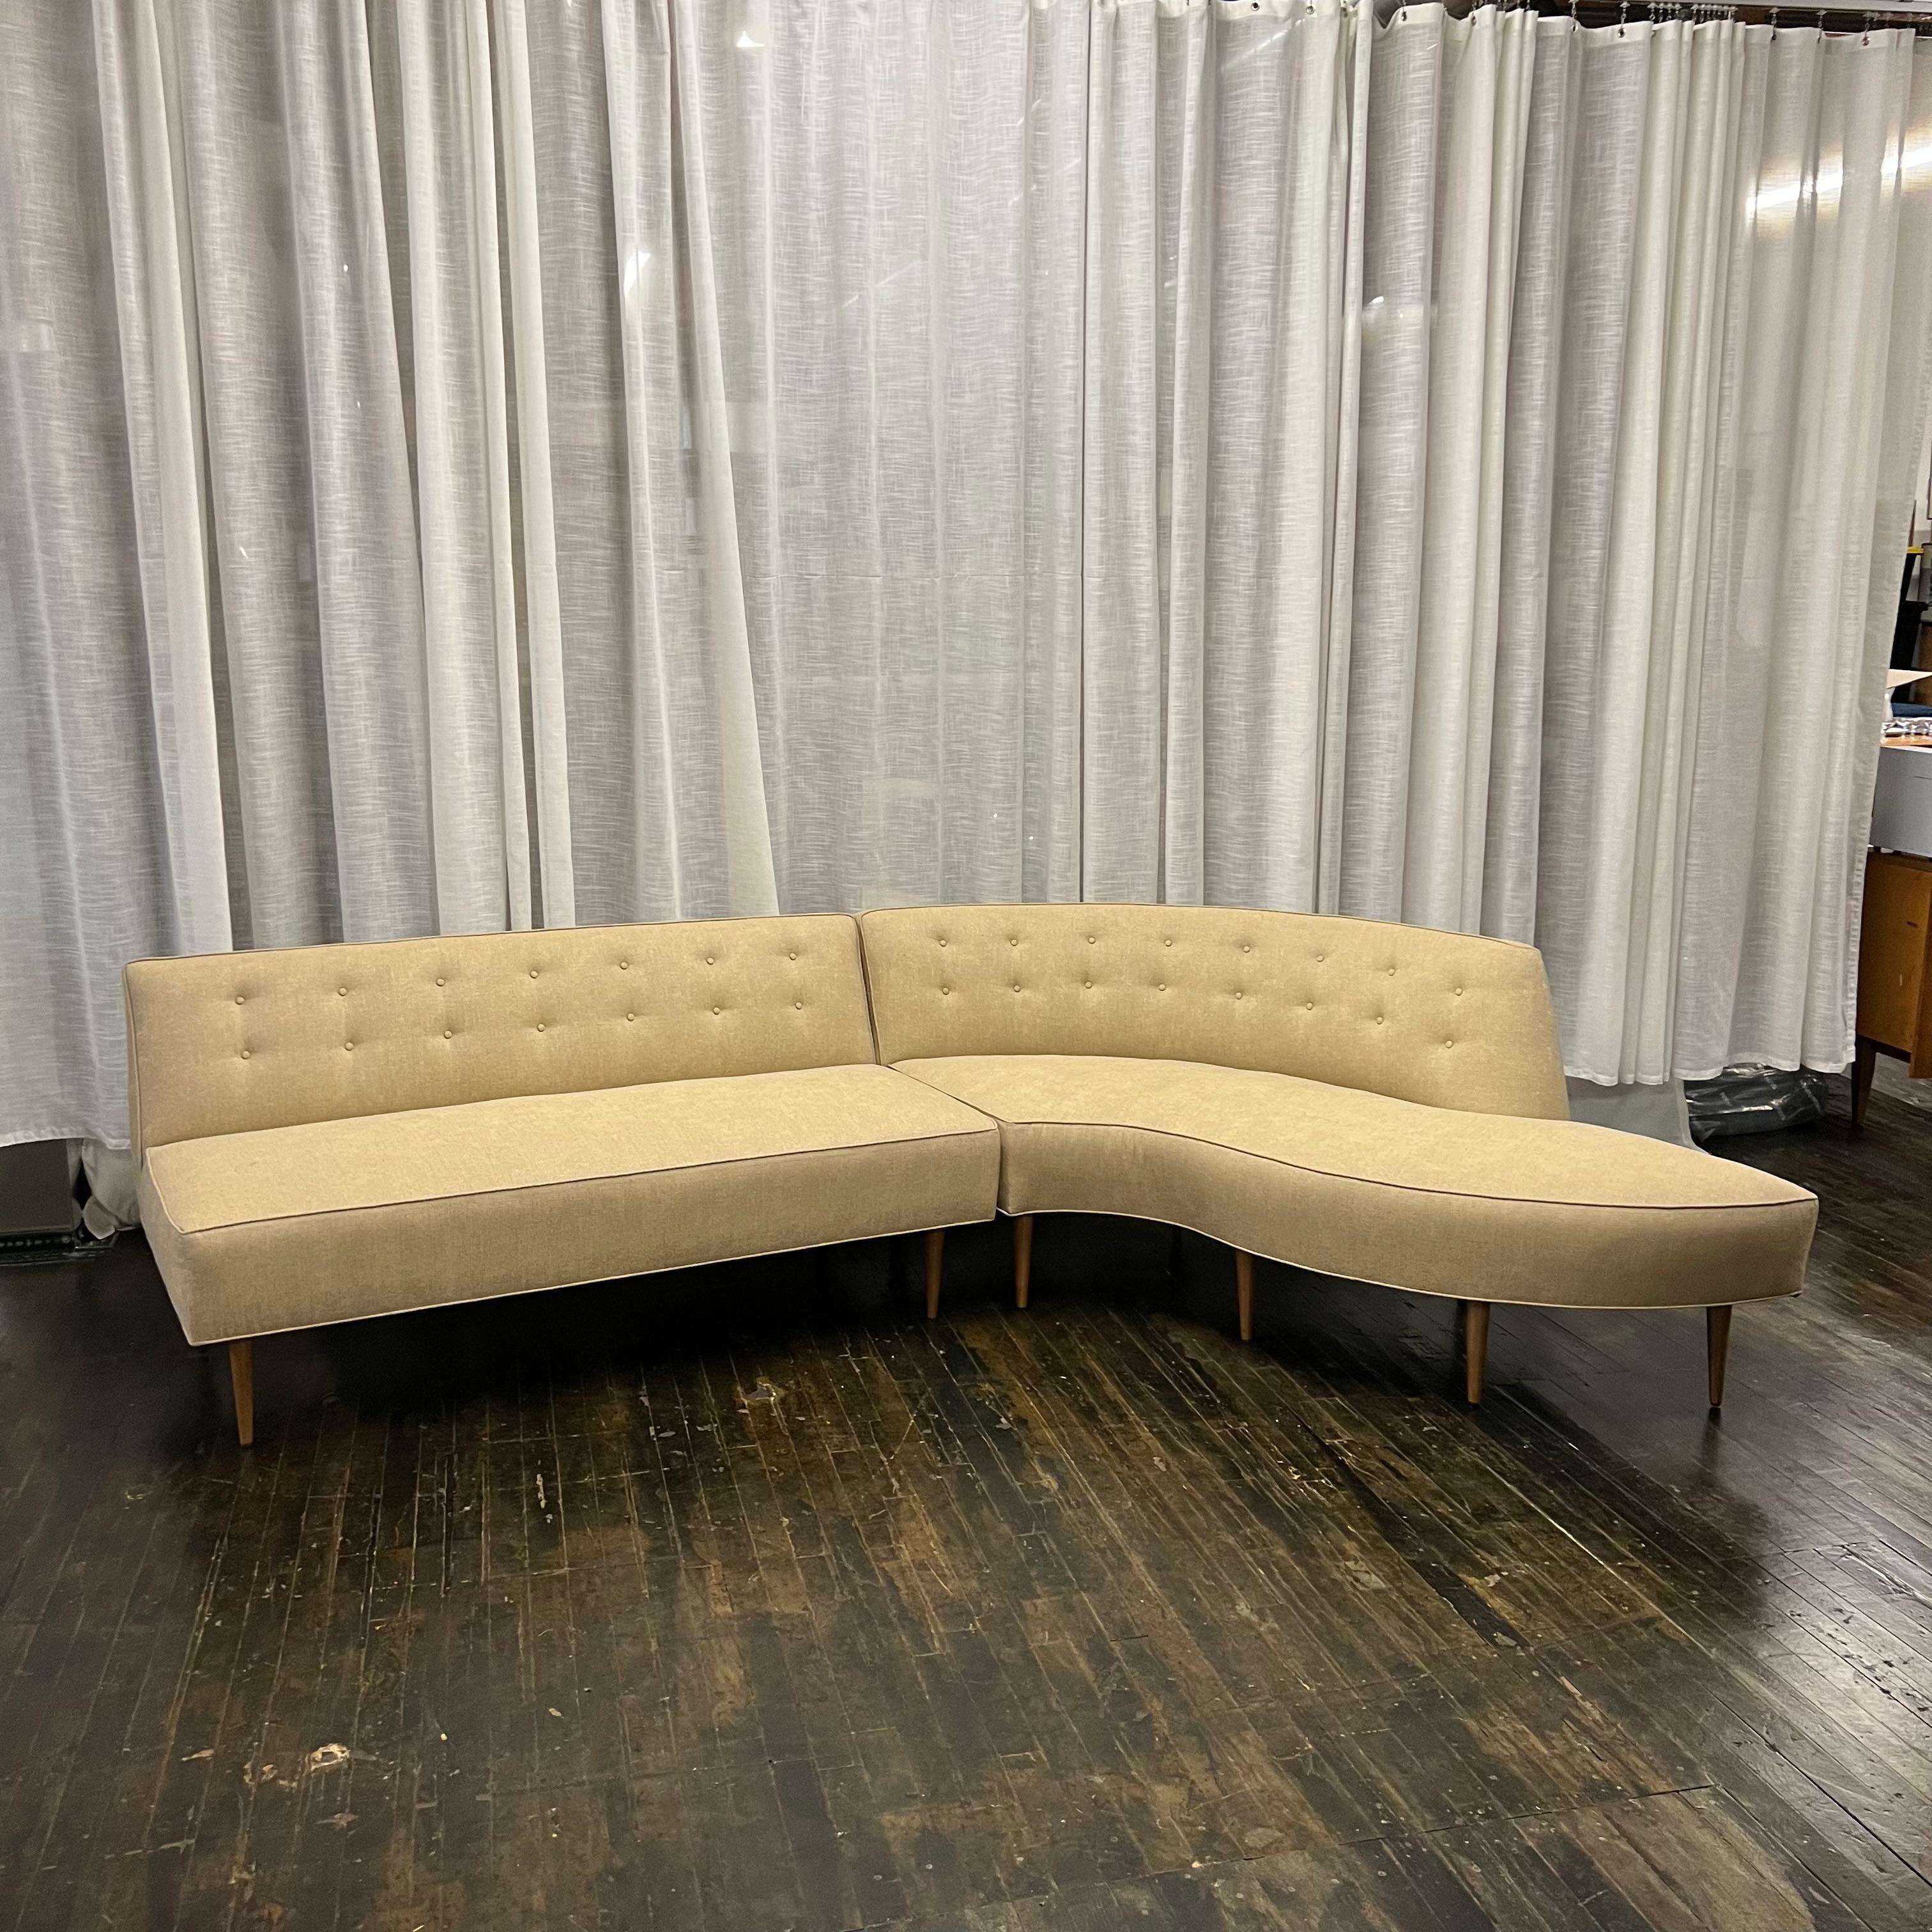 Gorgeous fully restored and reupholstered two piece mid-century curved sectional sofa.  The fitted back has button tufting and it features a tight seat.  It looks lean and sexy.  It is also very comfortable. 

This extraordinary sectional was custom